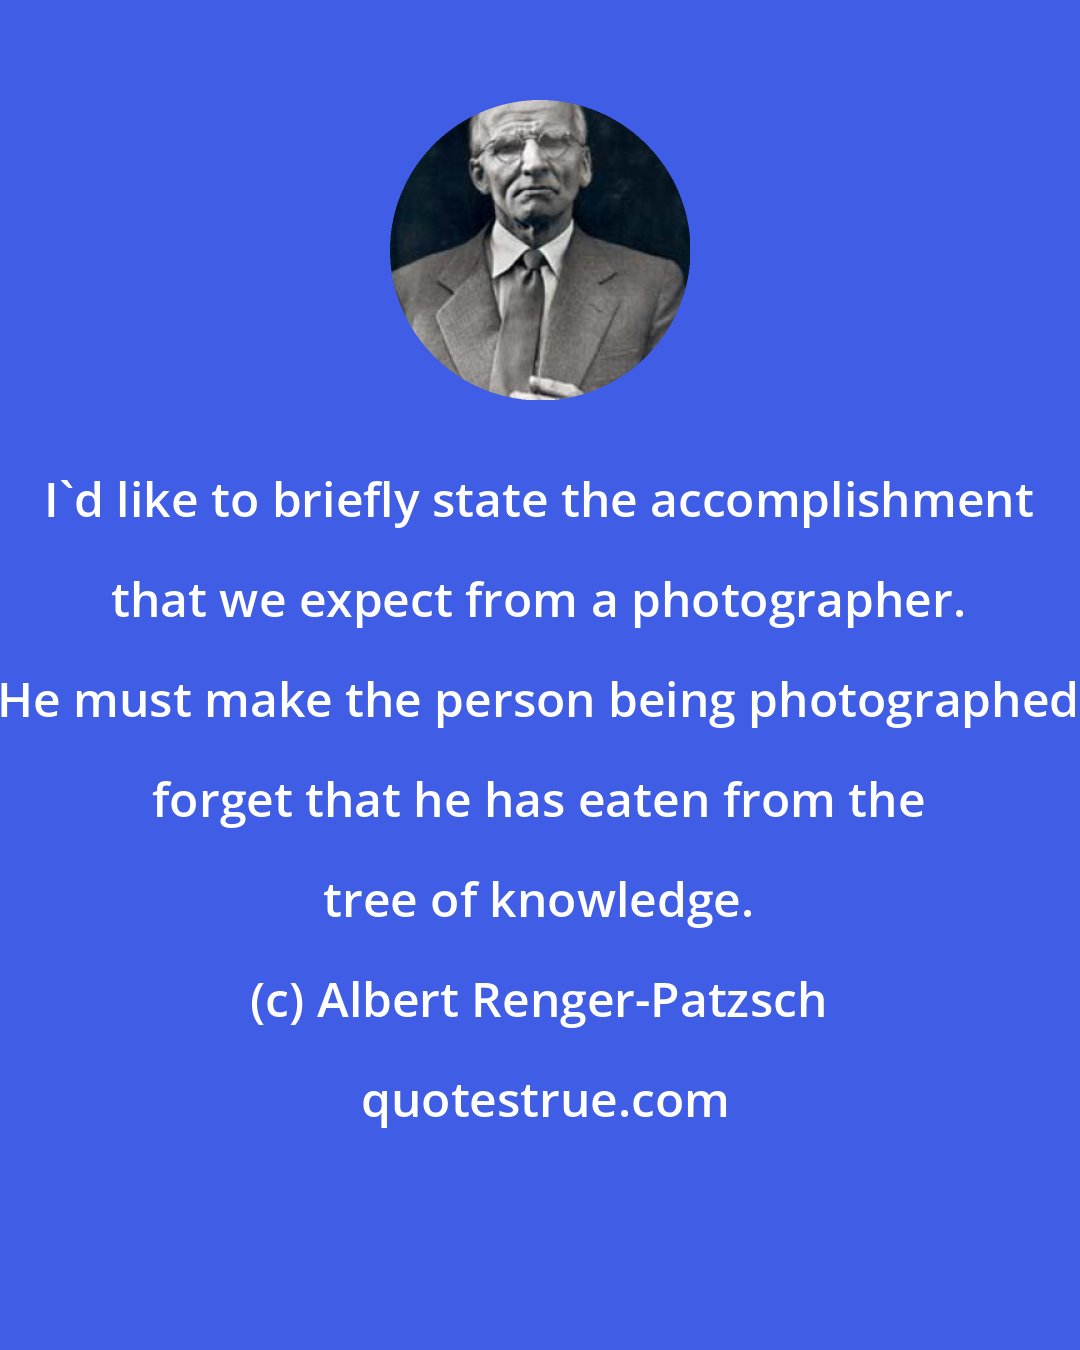 Albert Renger-Patzsch: I'd like to briefly state the accomplishment that we expect from a photographer. He must make the person being photographed forget that he has eaten from the tree of knowledge.